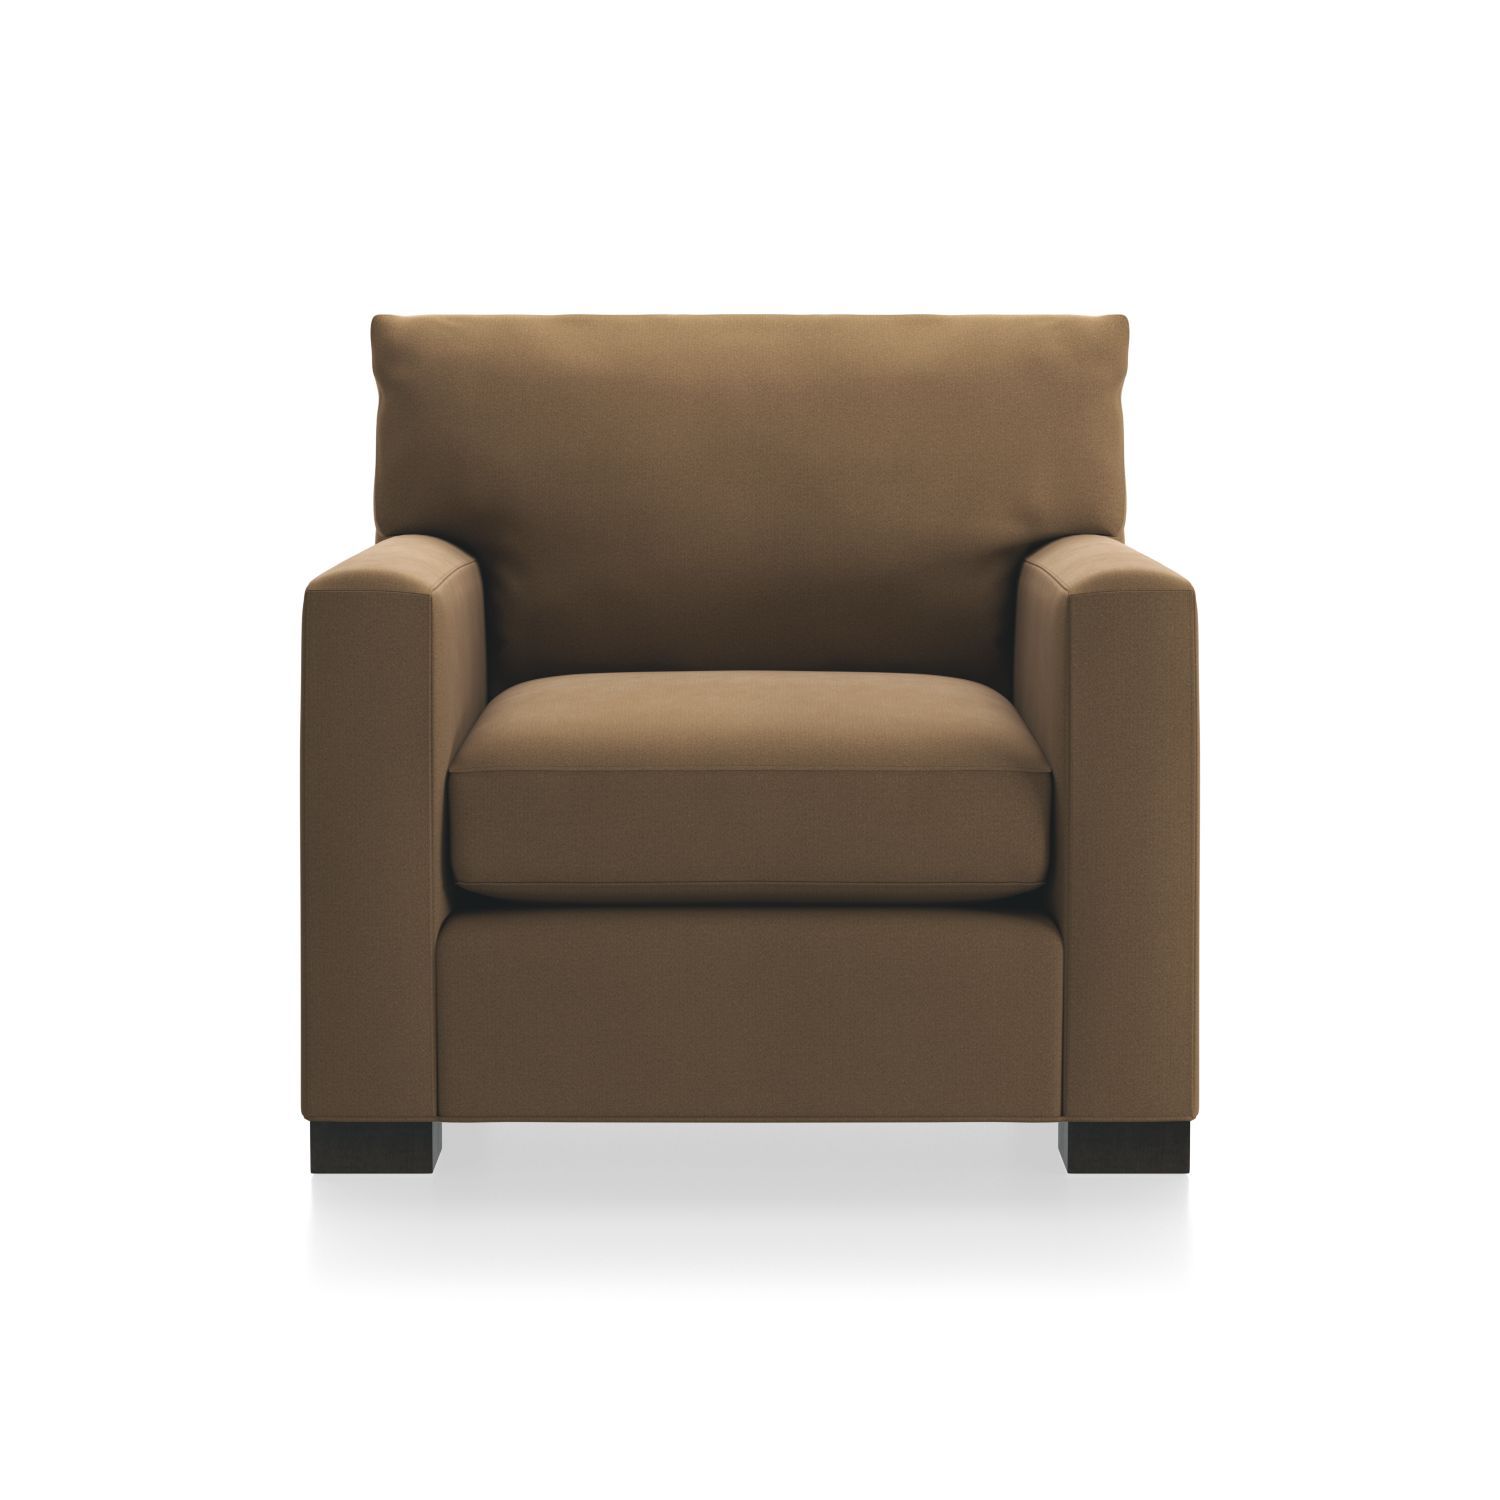 Axis Ii 2 Seat Brown Sleeper Sofa + Reviews | Crate And Barrel Throughout Alder Grande Ii Swivel Chairs (View 7 of 20)